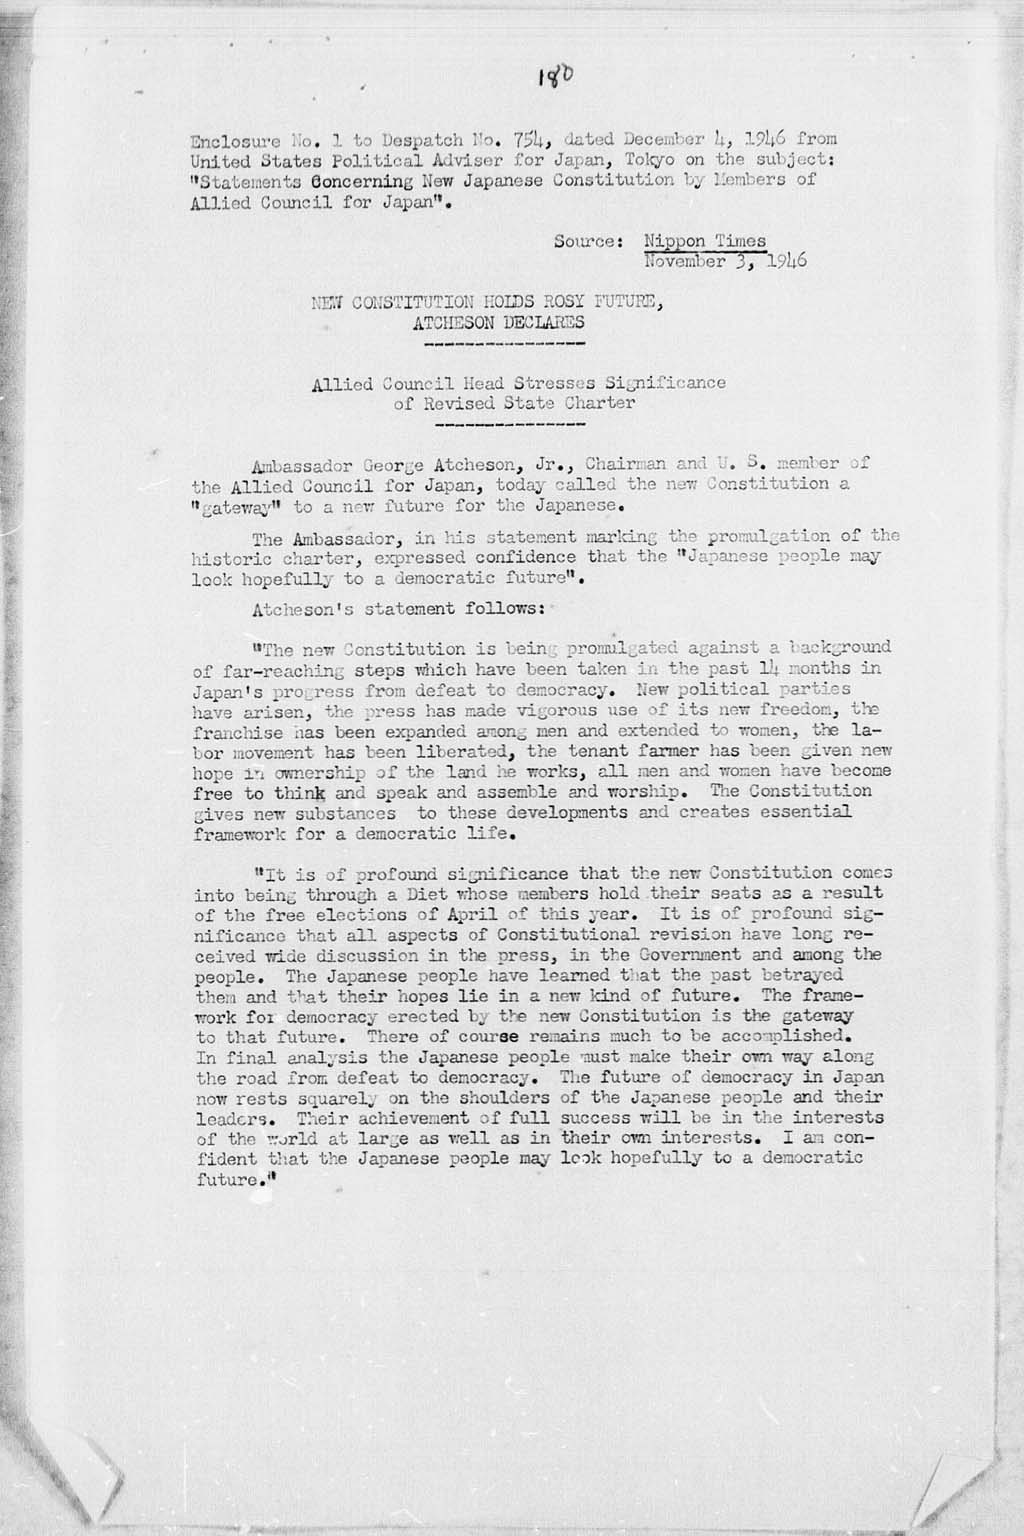 [Subject: Statements Concerning New Japanese Constitution by Members of Allied Council for Japan](Larger image)